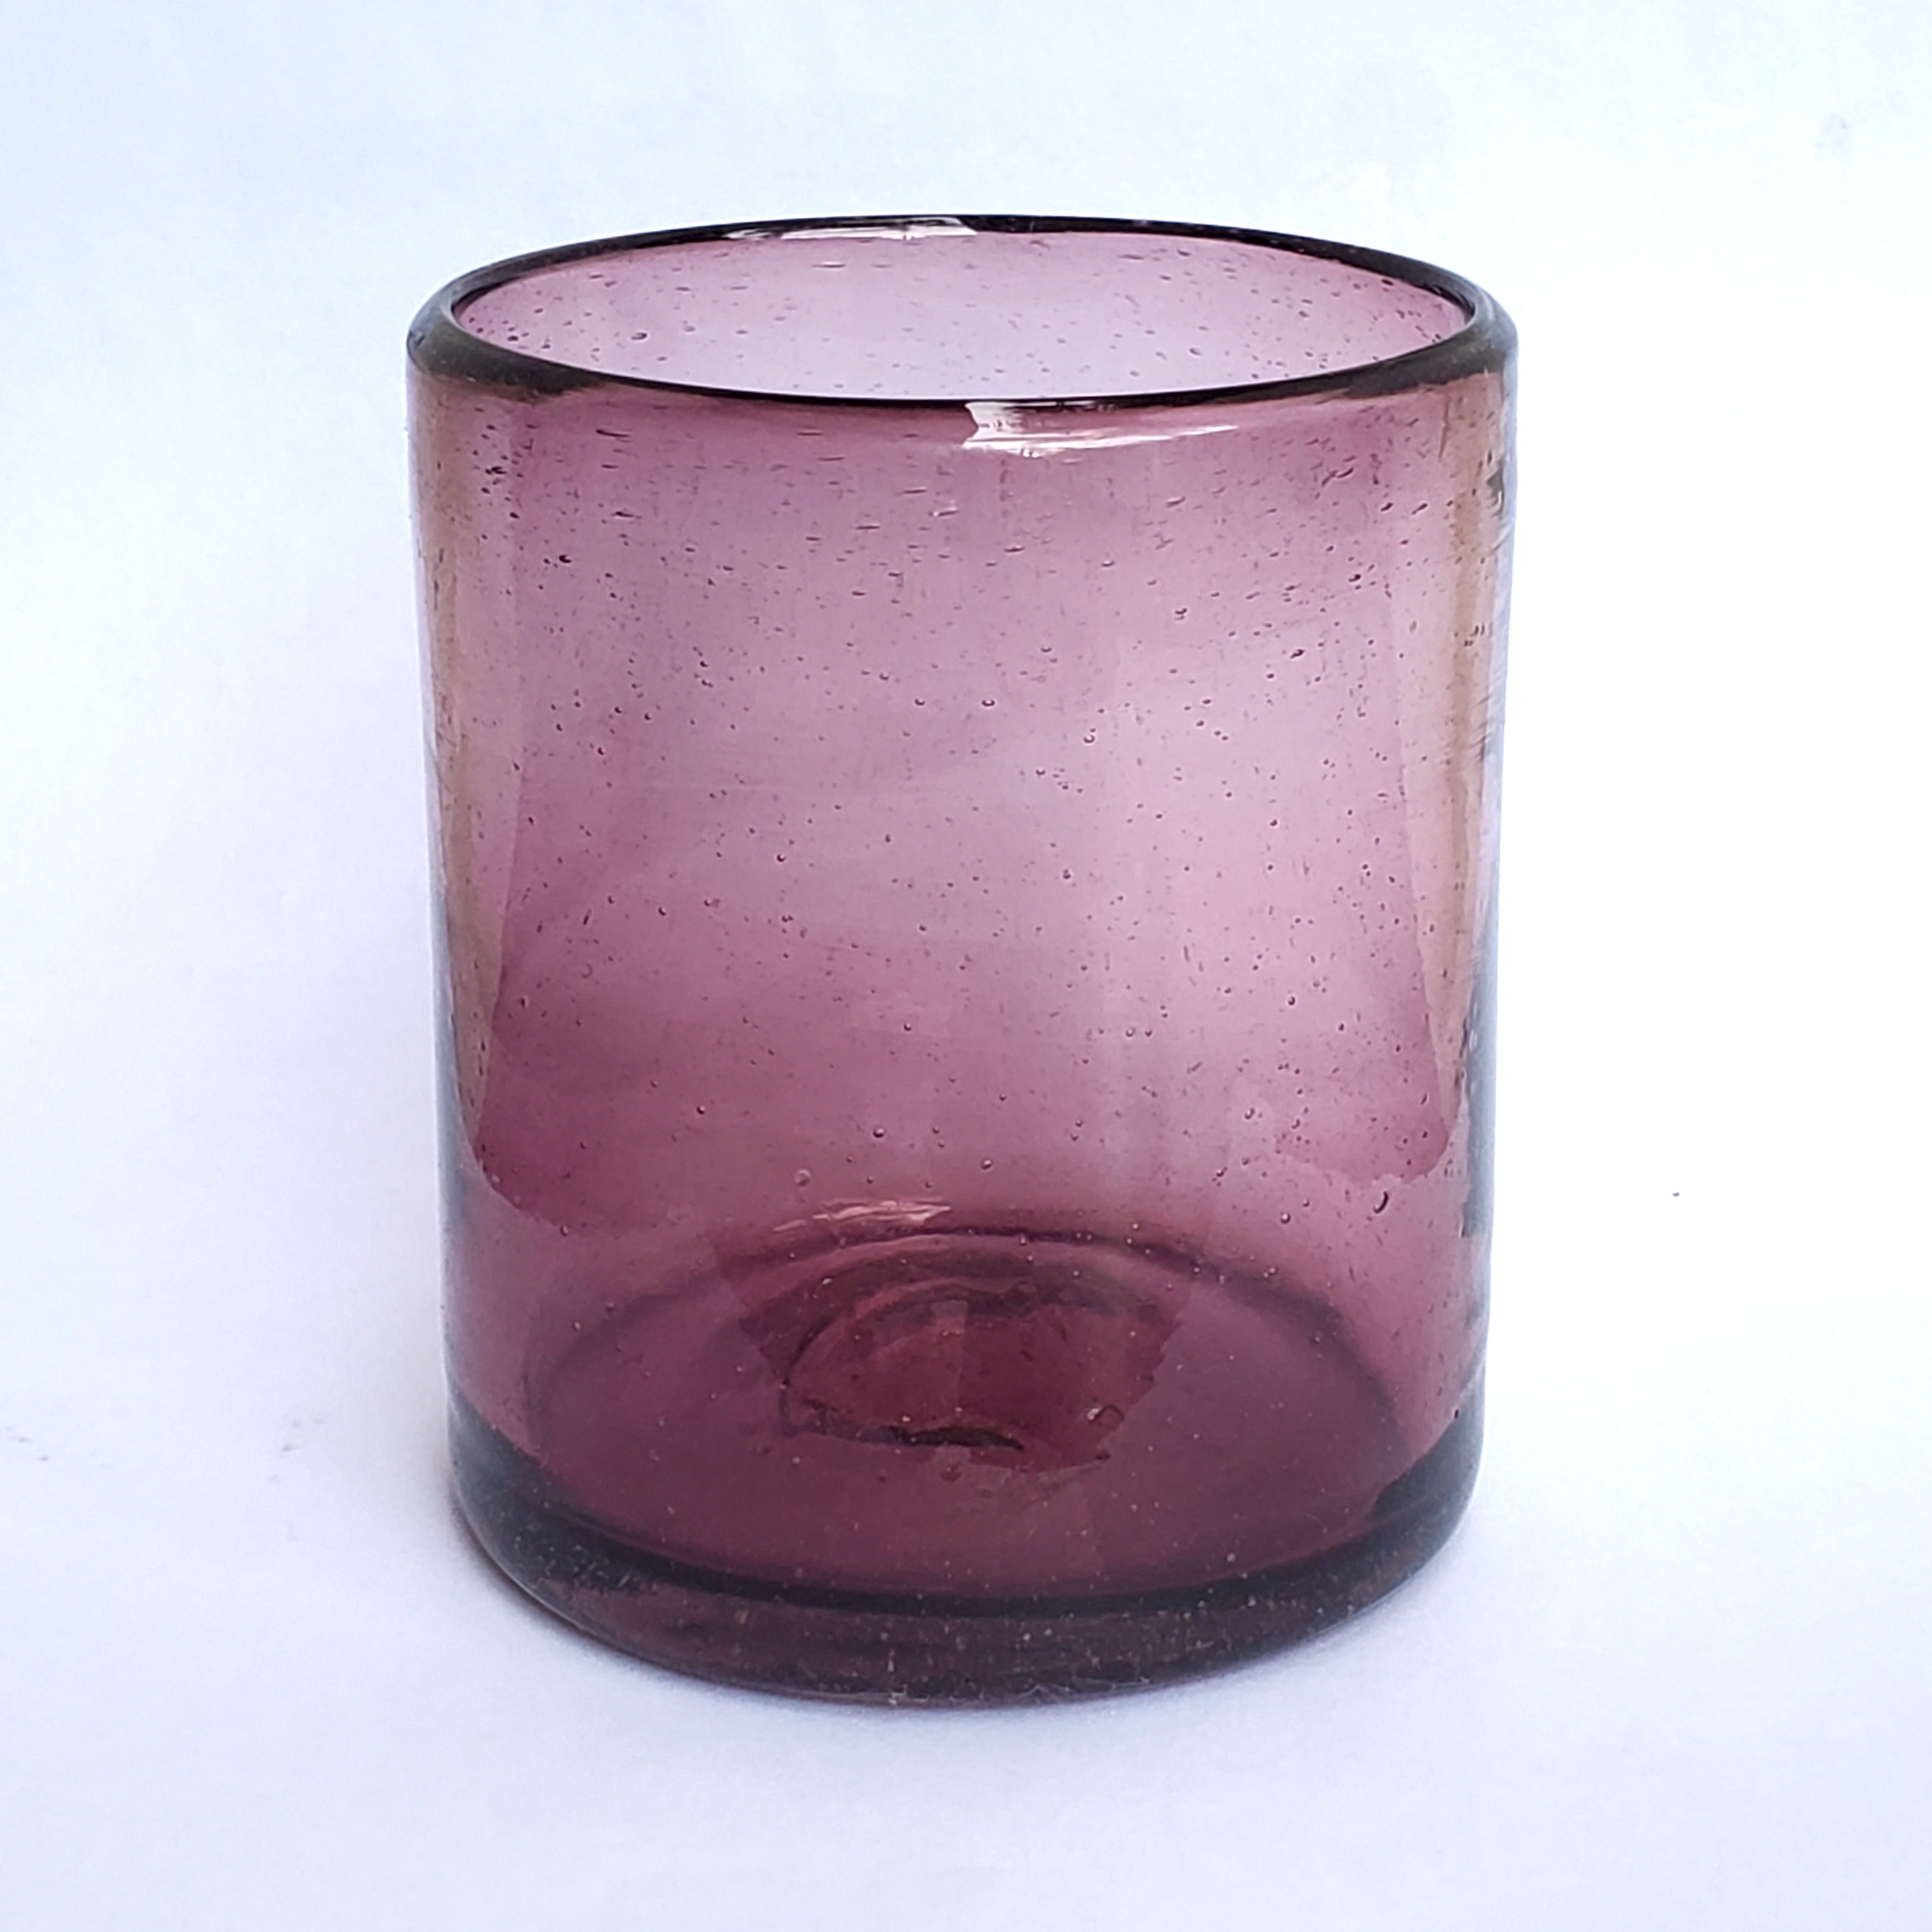 Wholesale Mexican Glasses / Solid Amethyst 9 oz Short Tumblers  / Enhance your table setting with our beautiful Amethyst colored glasses.